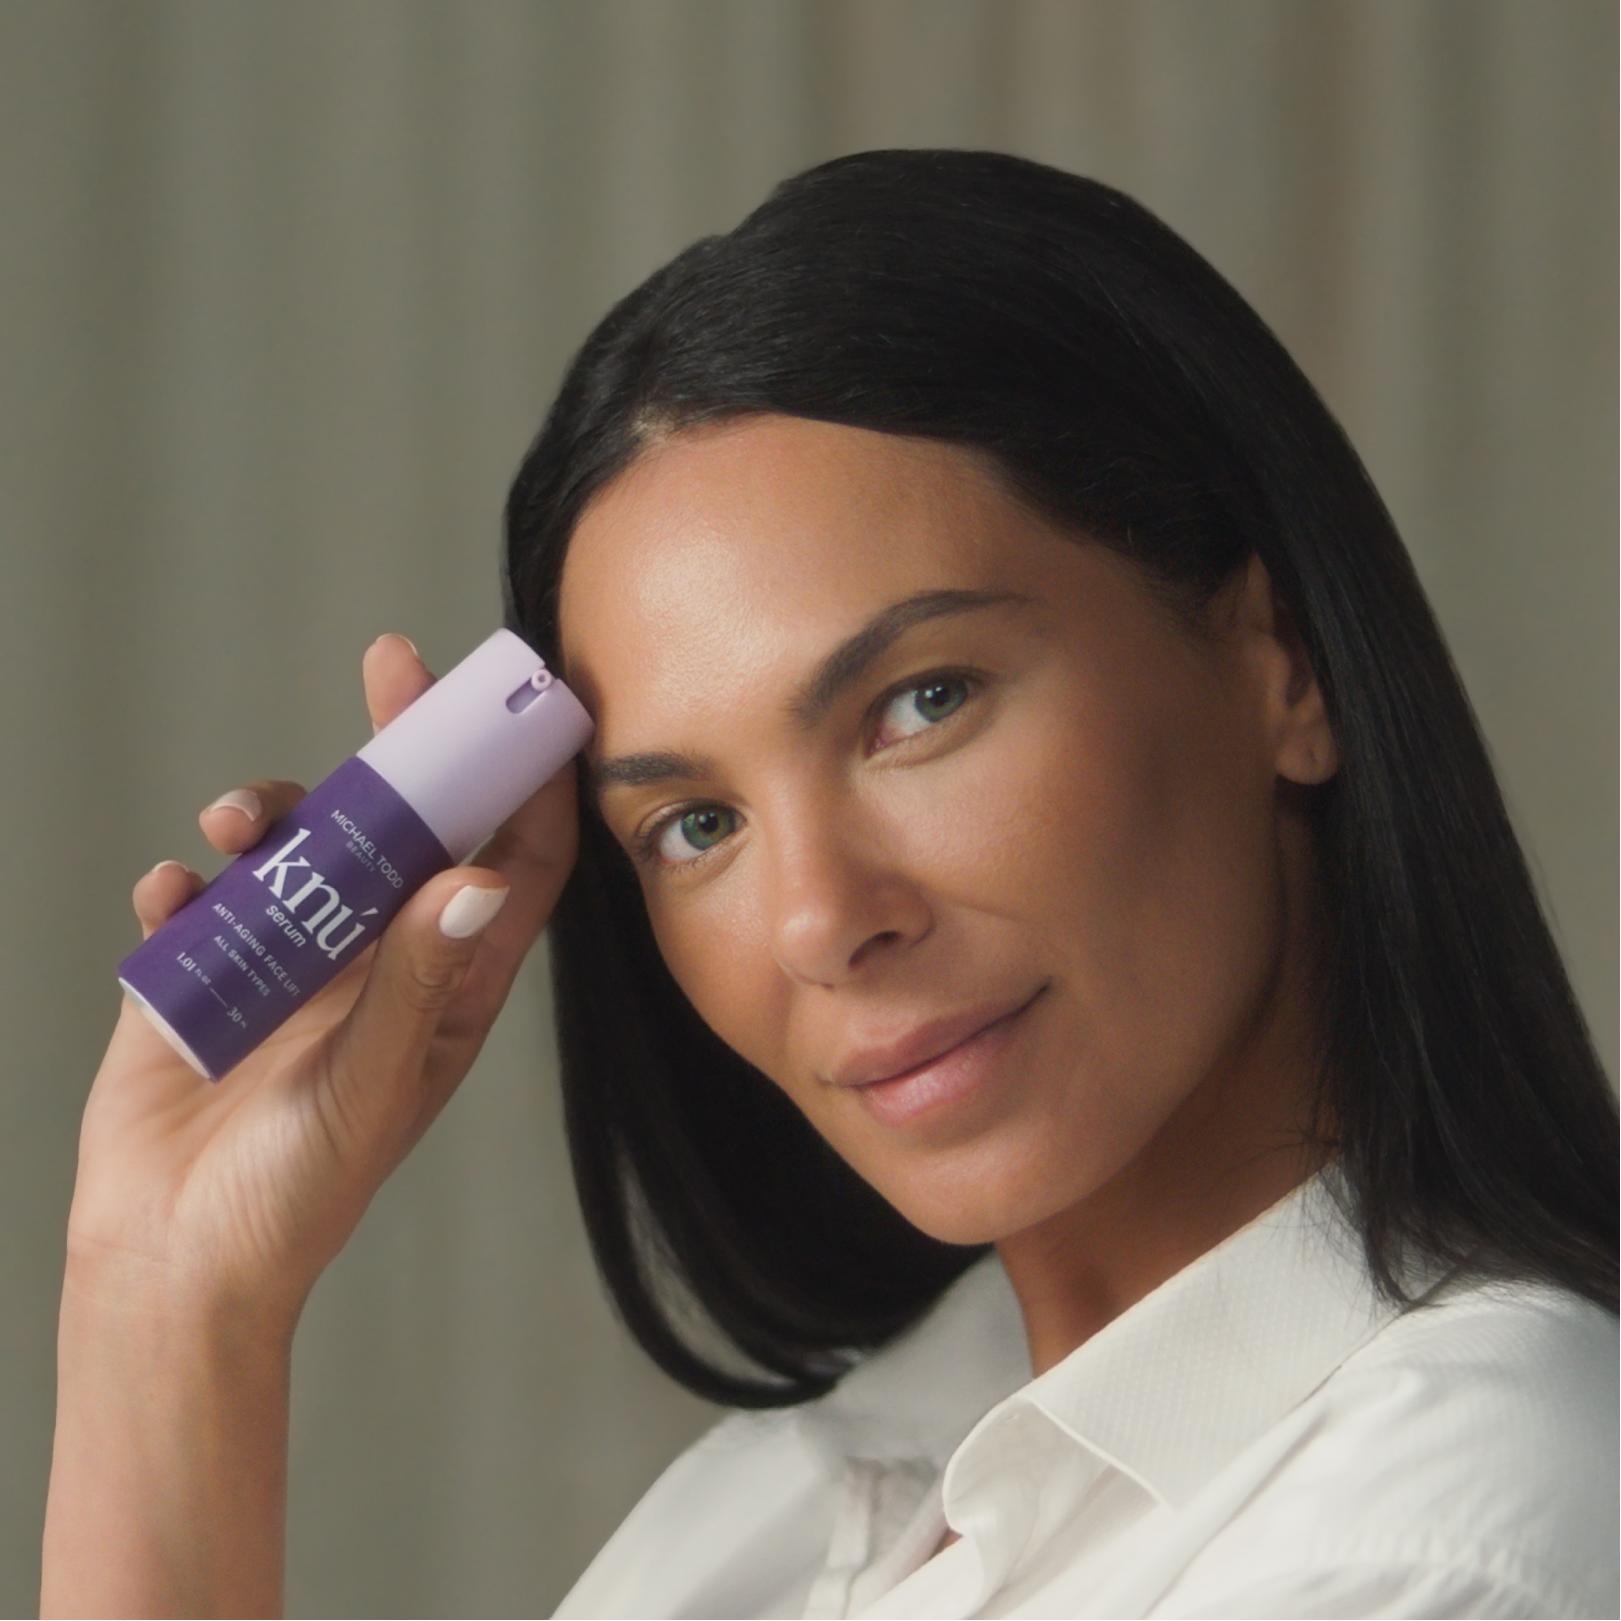 A woman is holding a Knú Ageless Duo rejuvenated serum lotion by Michael Todd Beauty.